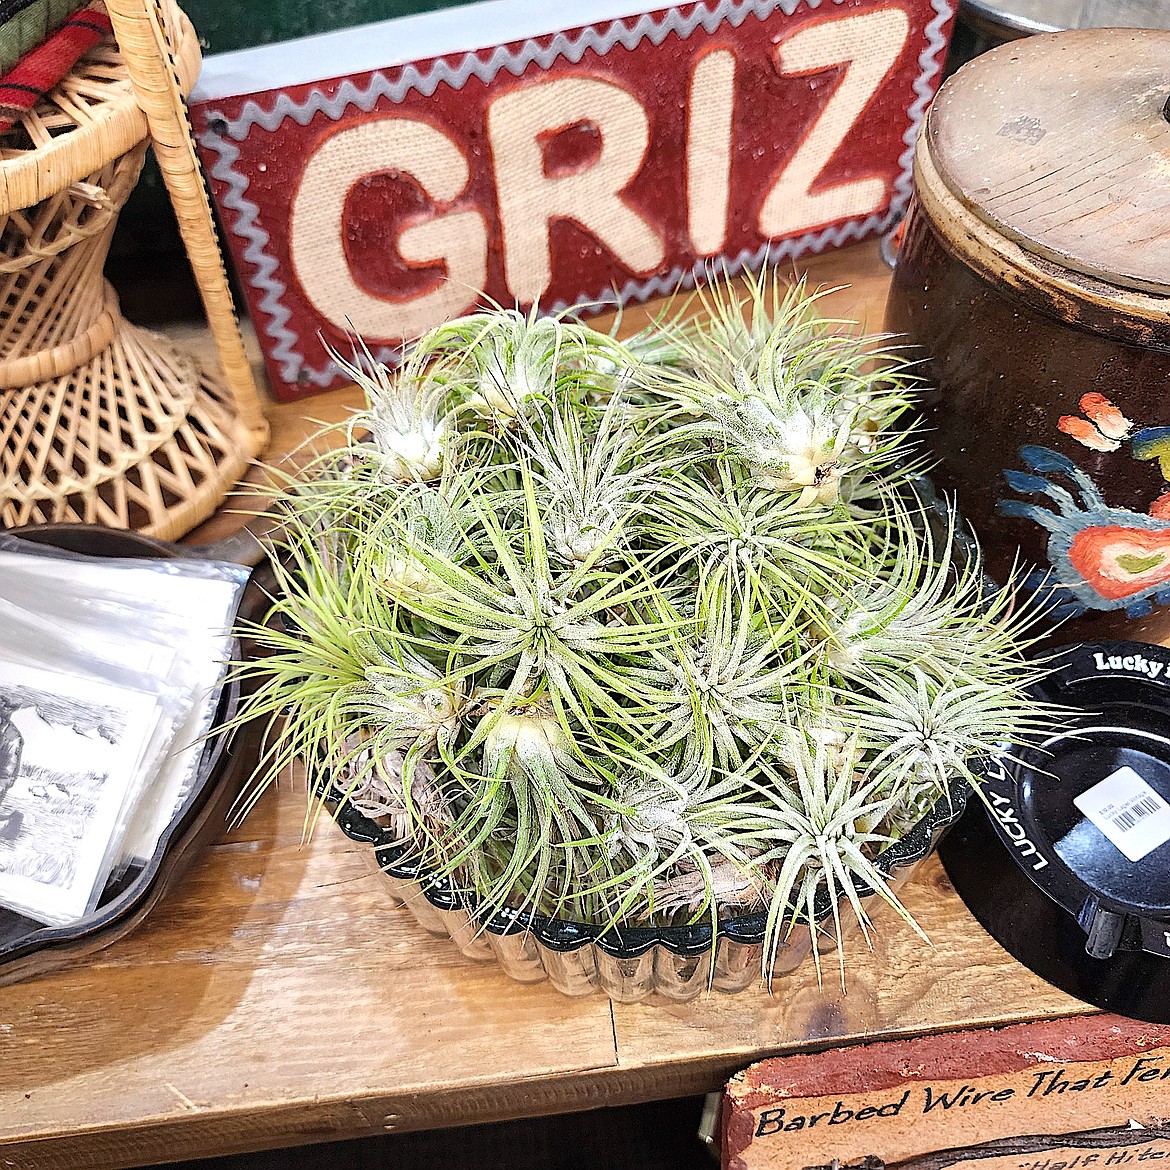 The Little Shop Montana stocks lots of air plants, some in this bowl and some in tiny wooden planters. (Berl Tiskus/Leader)